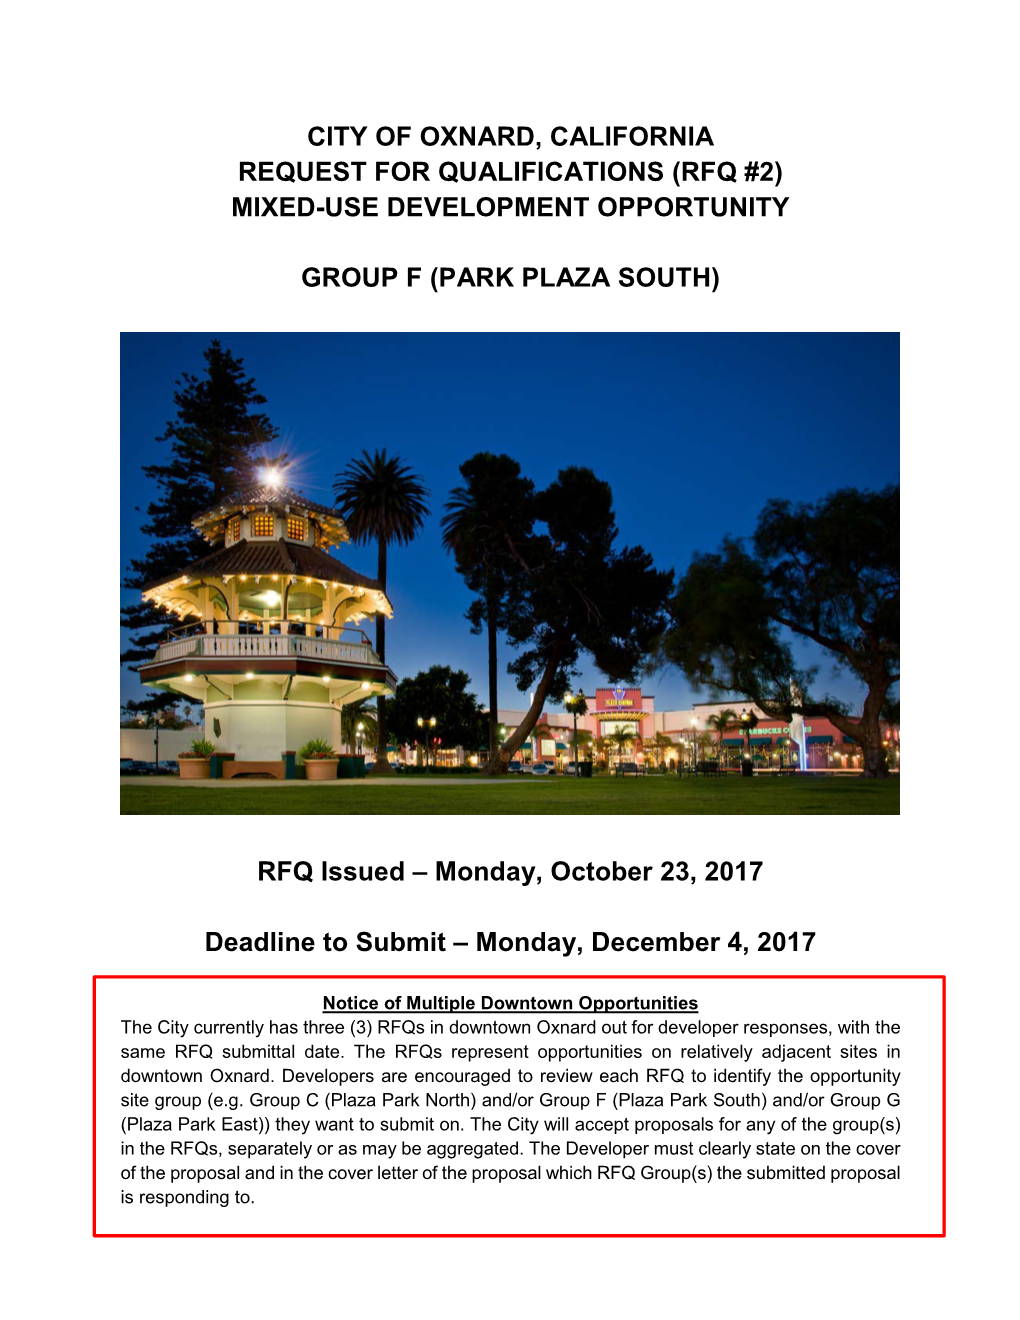 City of Oxnard, California Request for Qualifications (Rfq #2) Mixed-Use Development Opportunity Group F (Park Plaza South)